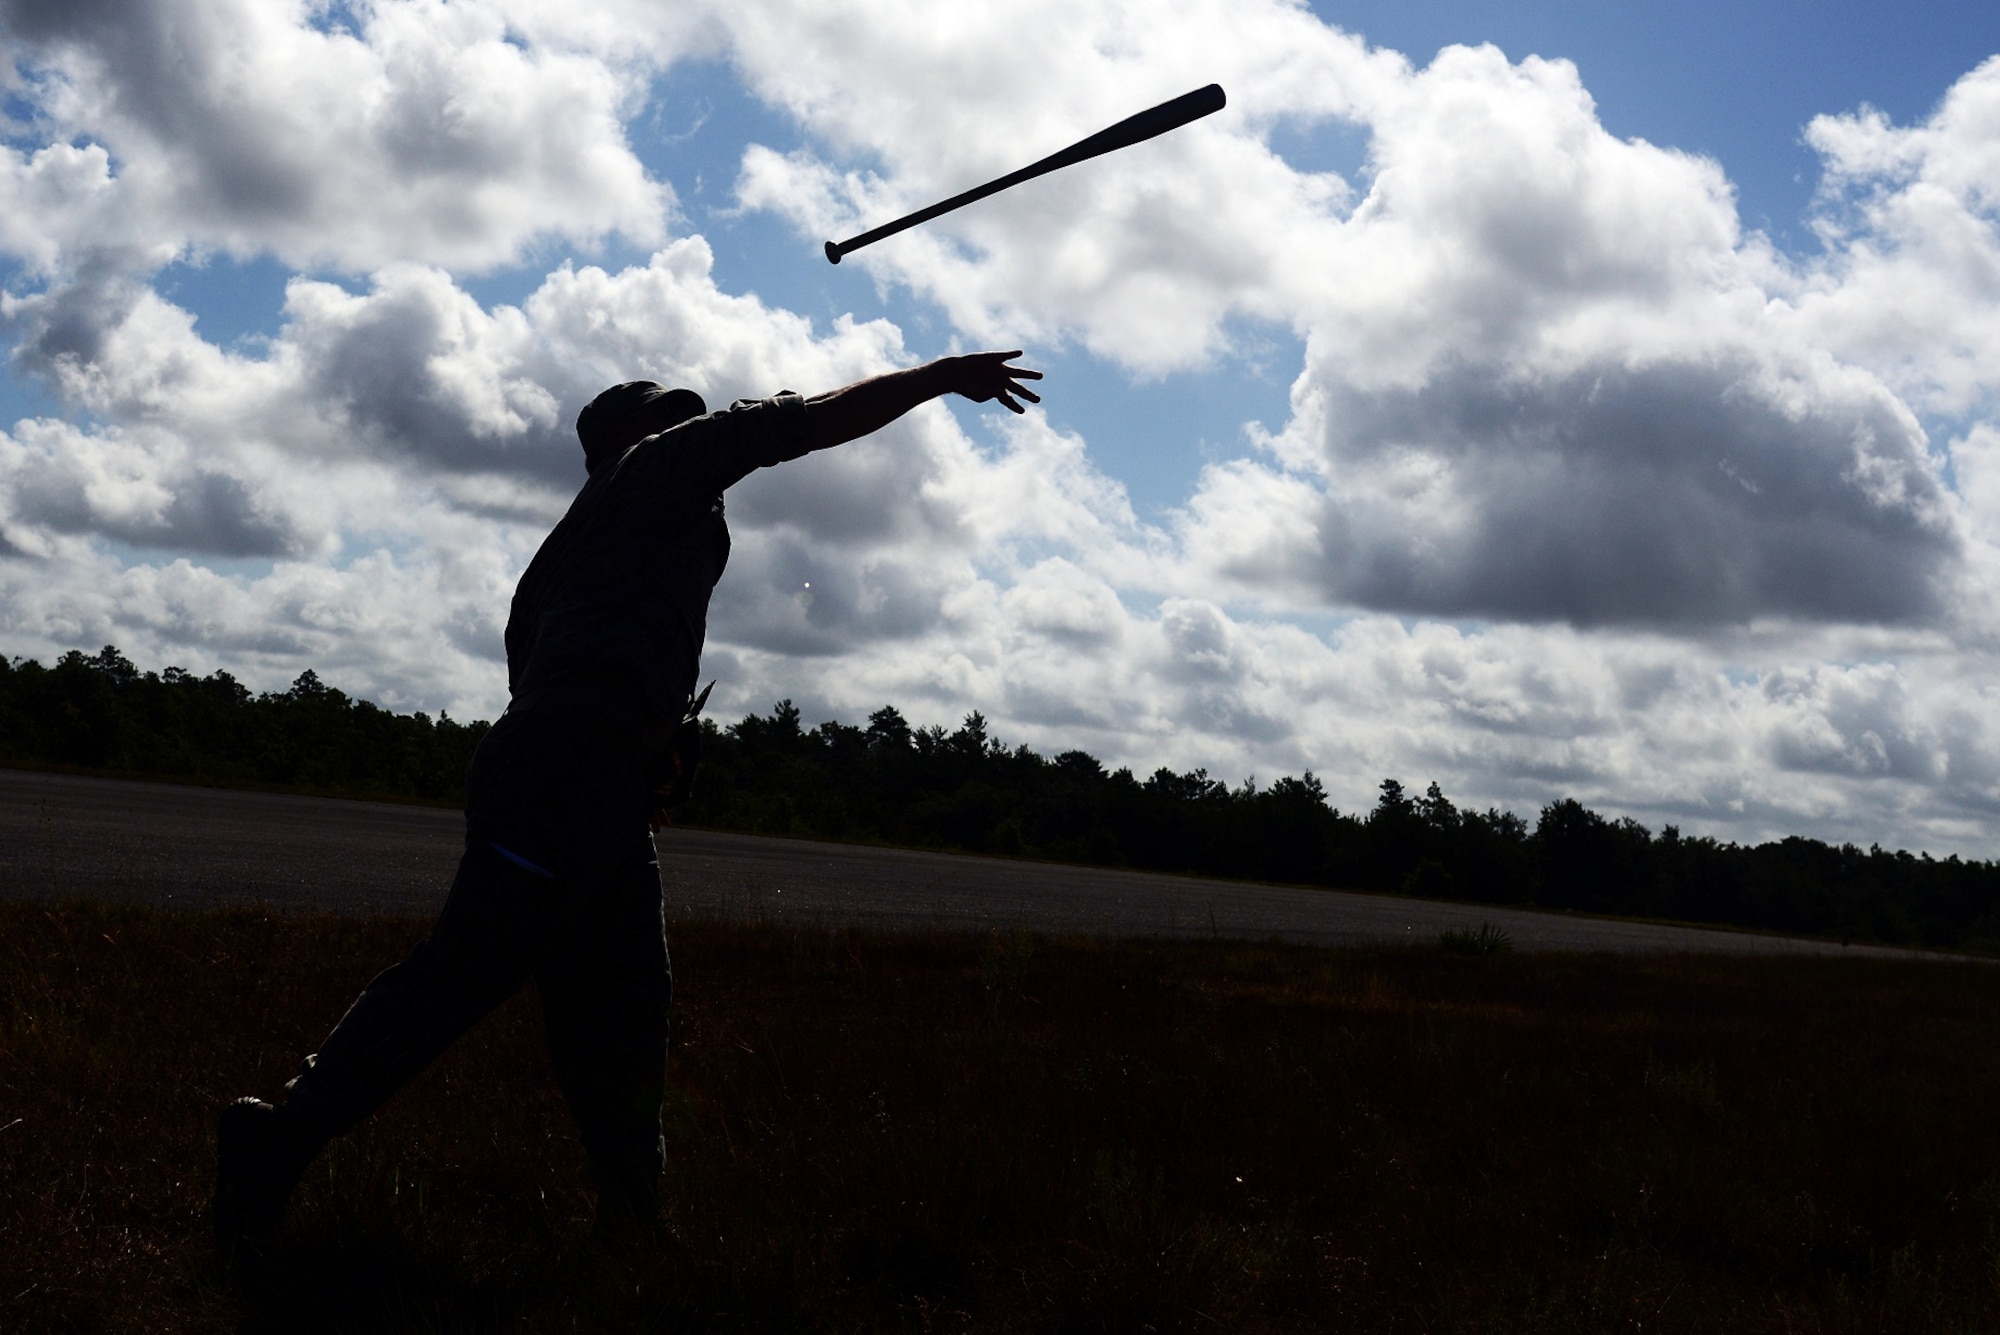 U.S. Air Force Academy Cadet 2nd Class Warren Saunders throws a baseball bat June 5, 2013 during an RQ-11B Raven Small Unmanned Aircraft System initial qualification training course at Choctaw Airfield, Fla. Students practiced throwing a baseball bat several times before they launched a SUAS to avoid unnecessary damages and repairs. The baseball bat is similar in shape and weight to the actual RQ-11B Raven. (U.S. Air Force photo by Staff Sgt. Melanie Holochwost)